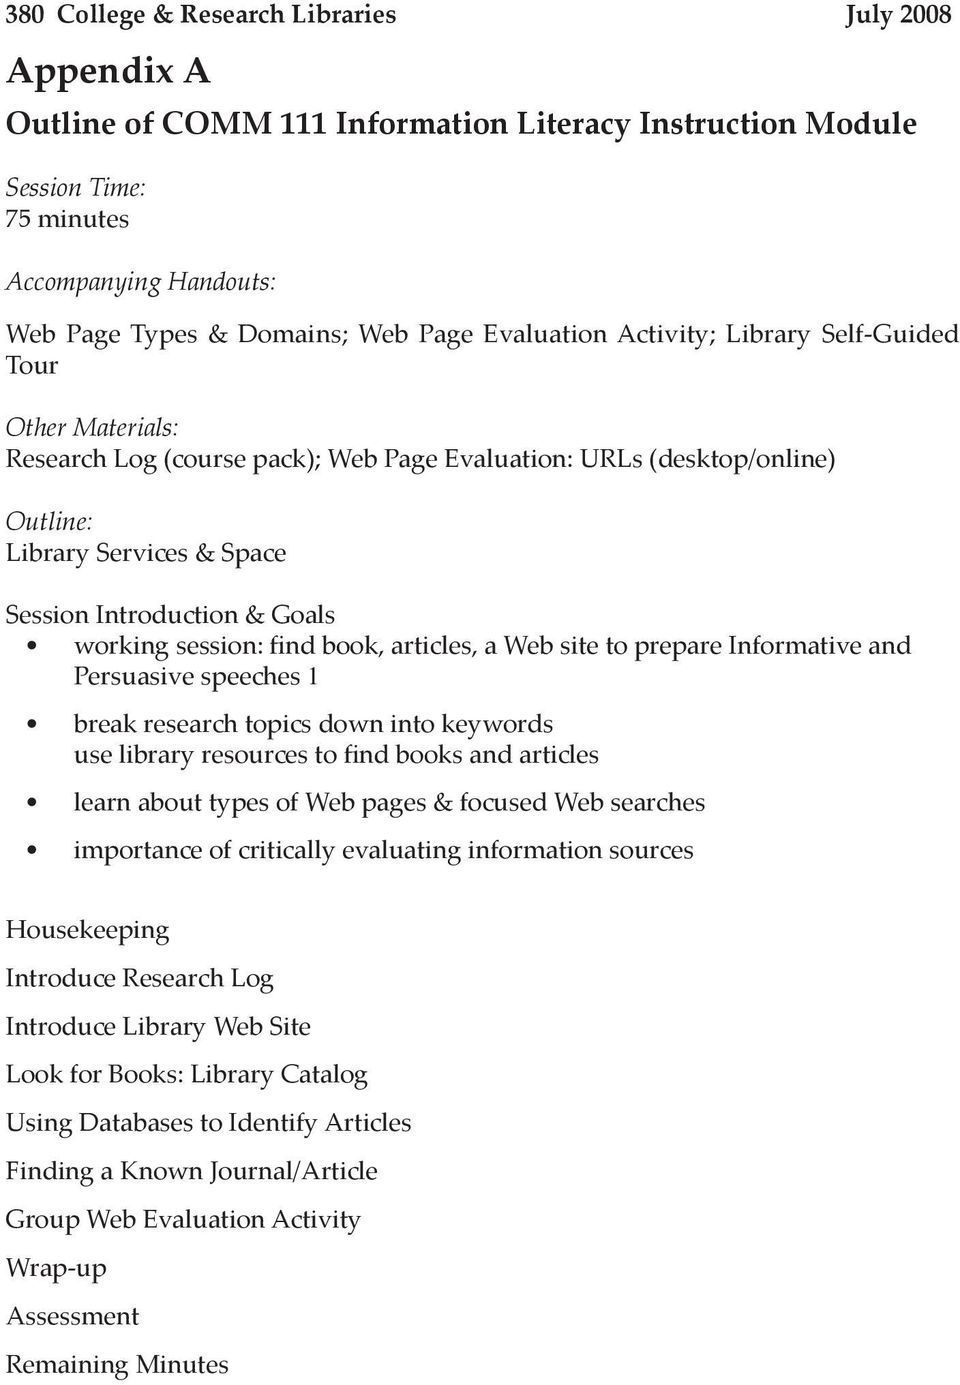 working session: find book, articles, a Web site to prepare Informative and Persuasive speeches1 break research topics down into keywords use library resources to find books and articles learn about